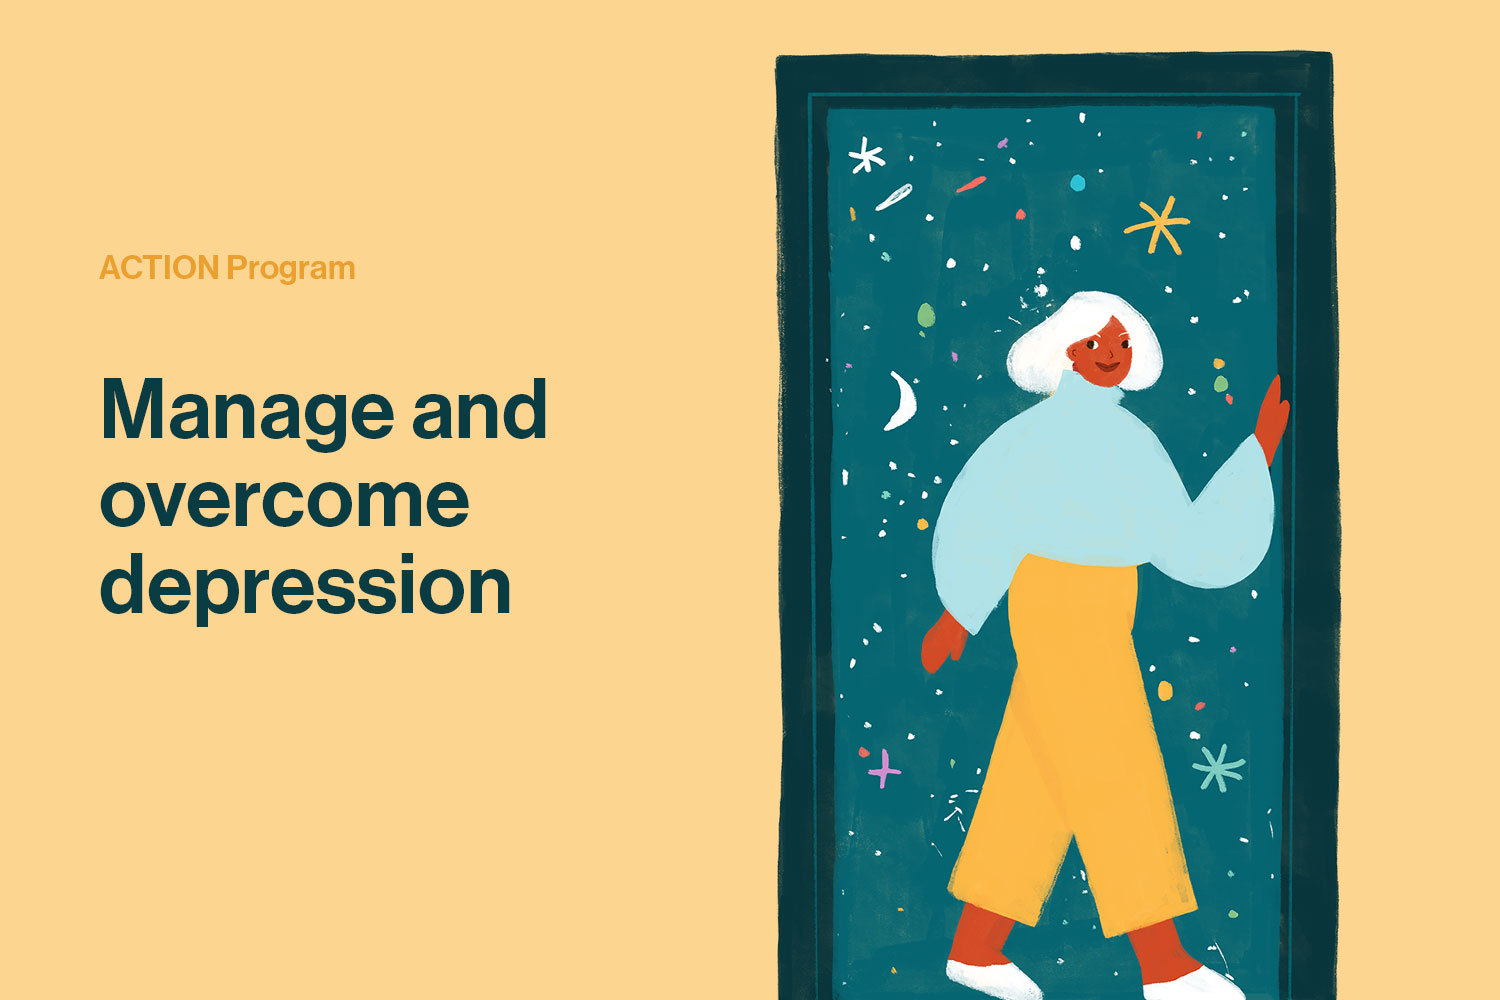 Hero illustration for Mental Health Online's depression (ACTION) program with the headline "Manage and overcome depression".